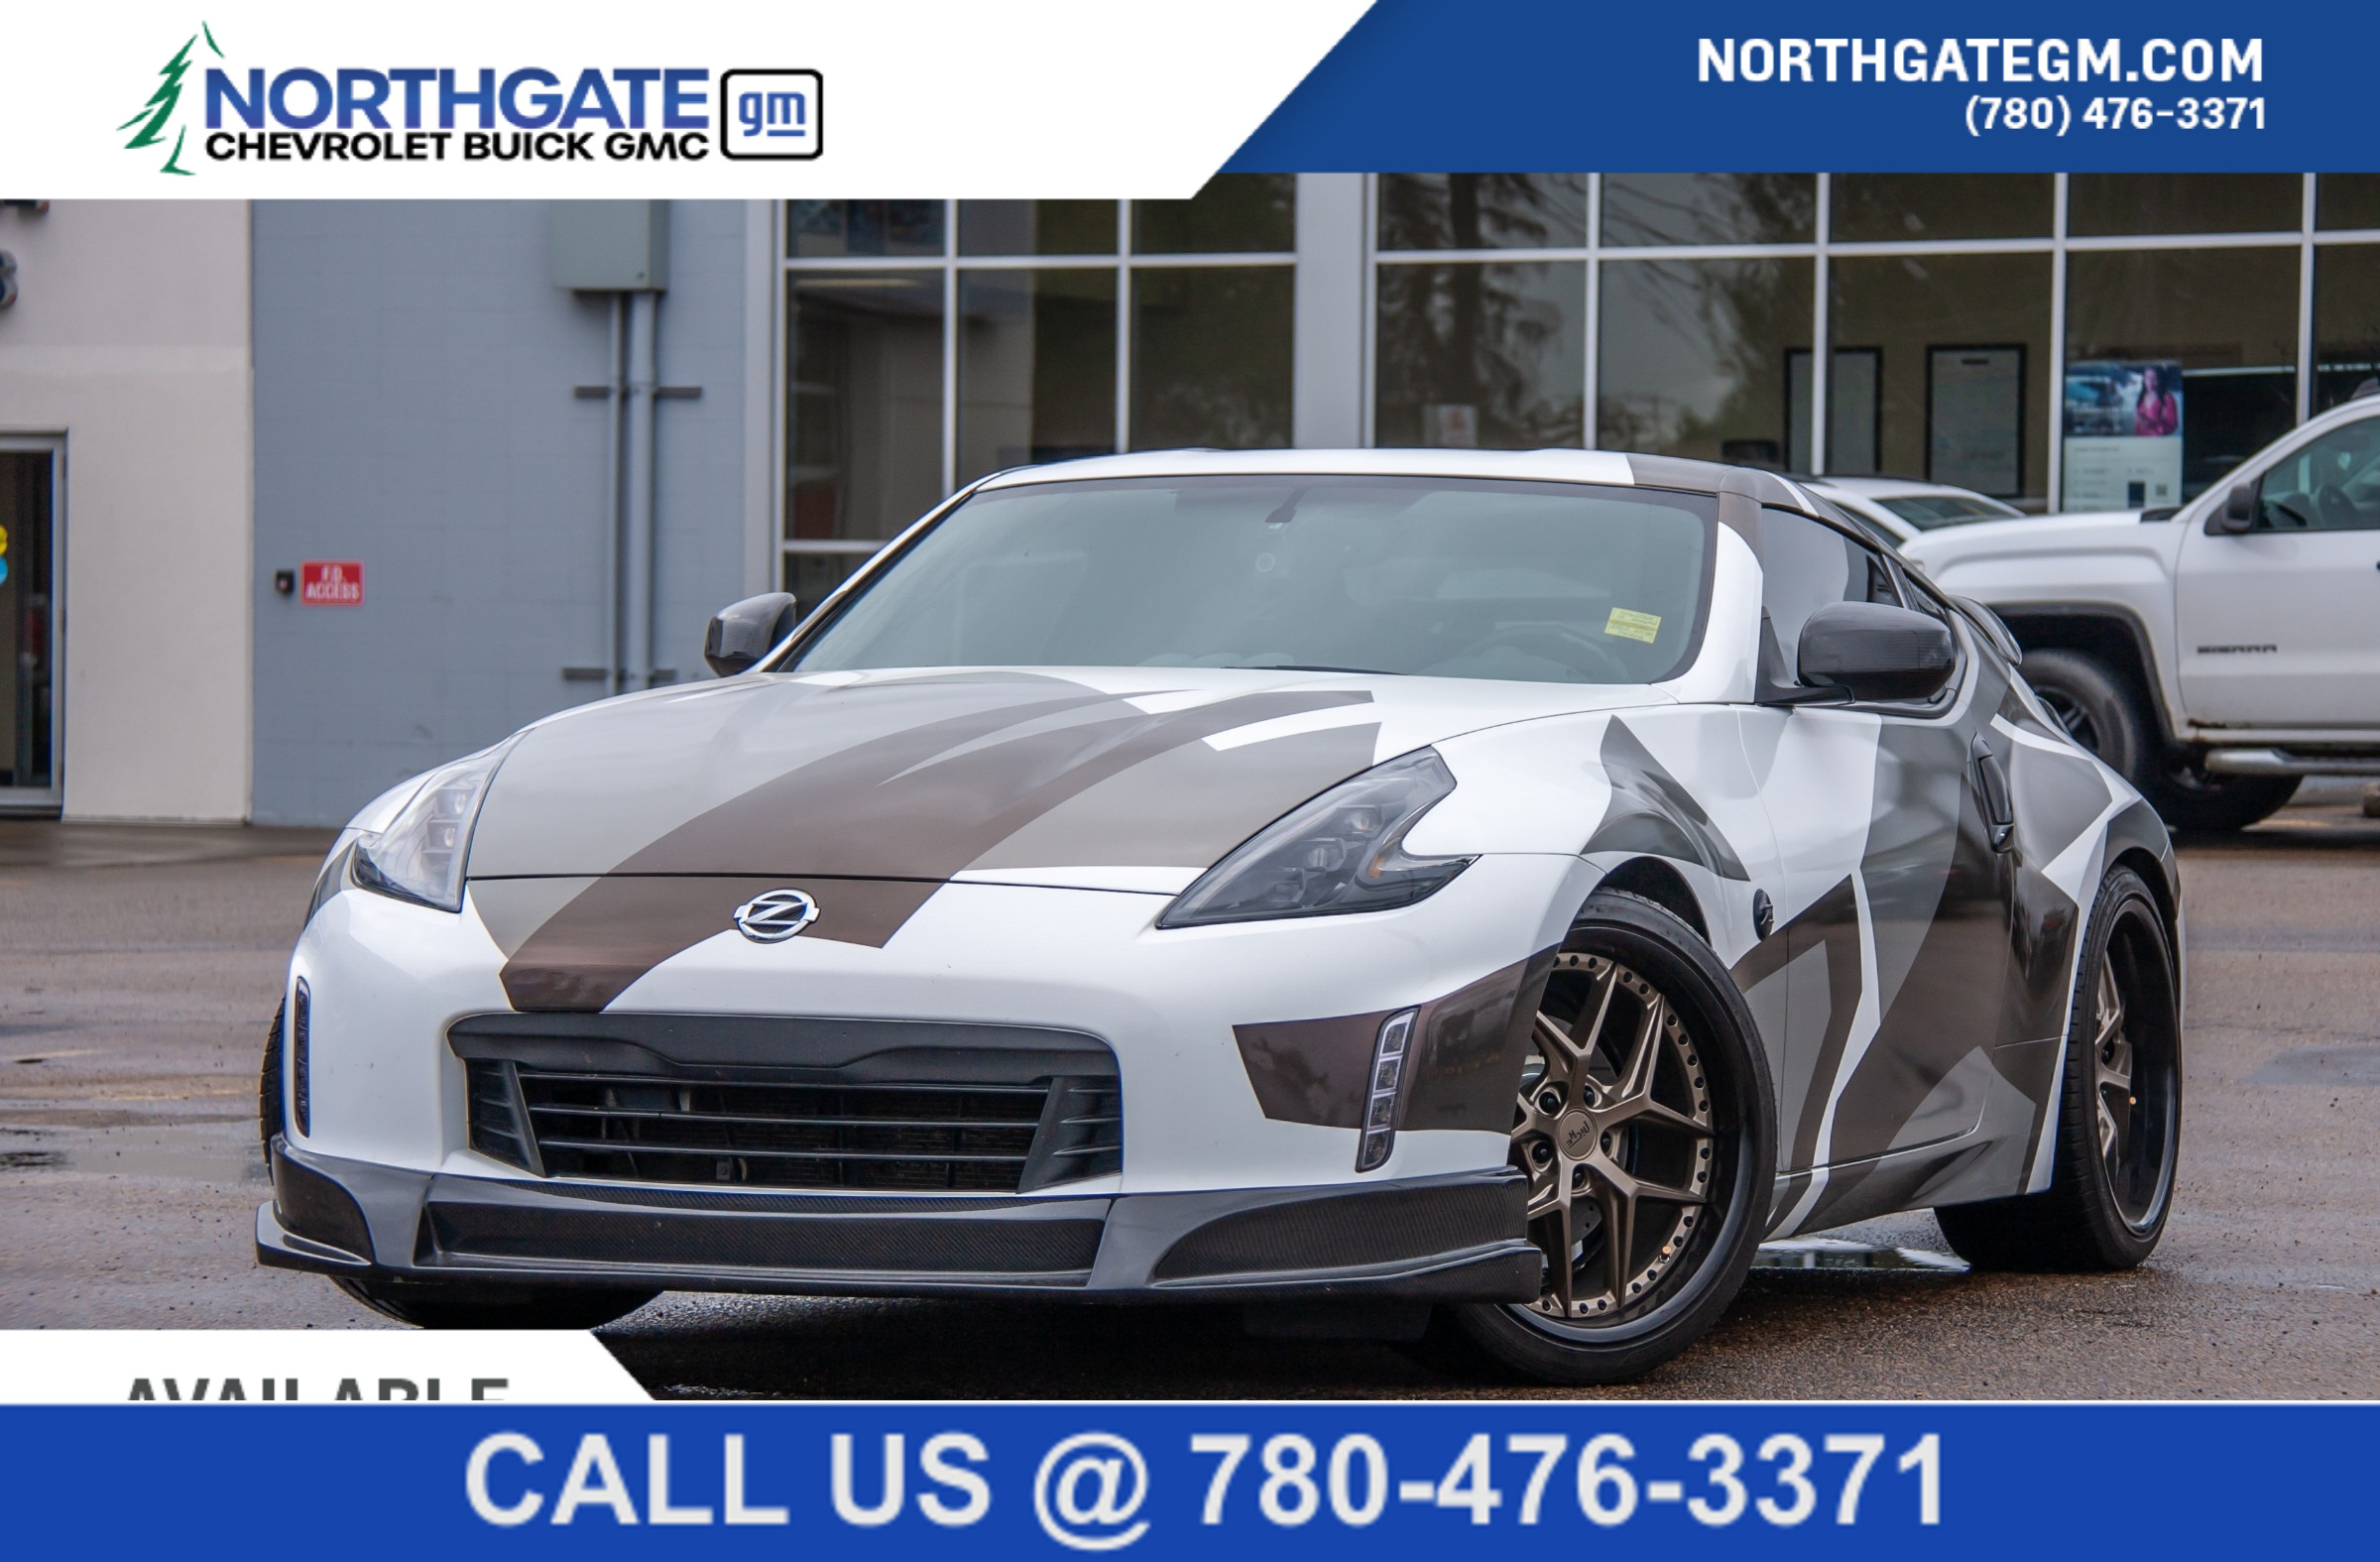 2013 Nissan 370Z 3.7L V6 | HEATED SEATS | LOW KMS & MORE